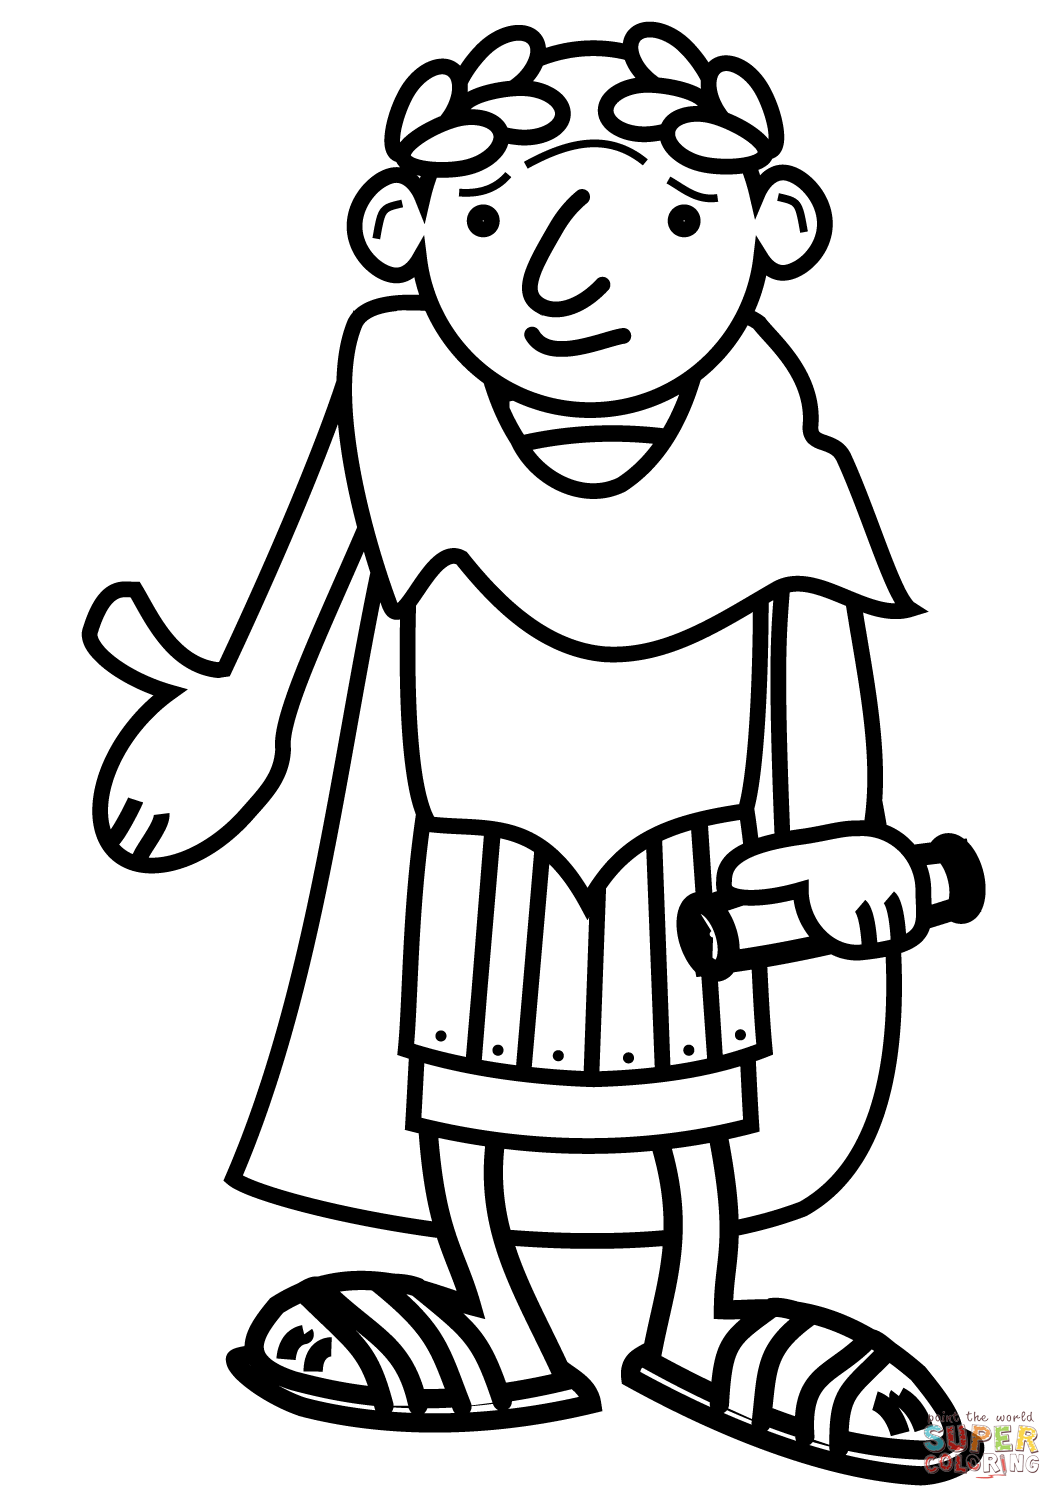 Cartoon Roman Emperor Coloring Page | Free Printable Coloring Pages -  Coloring Home